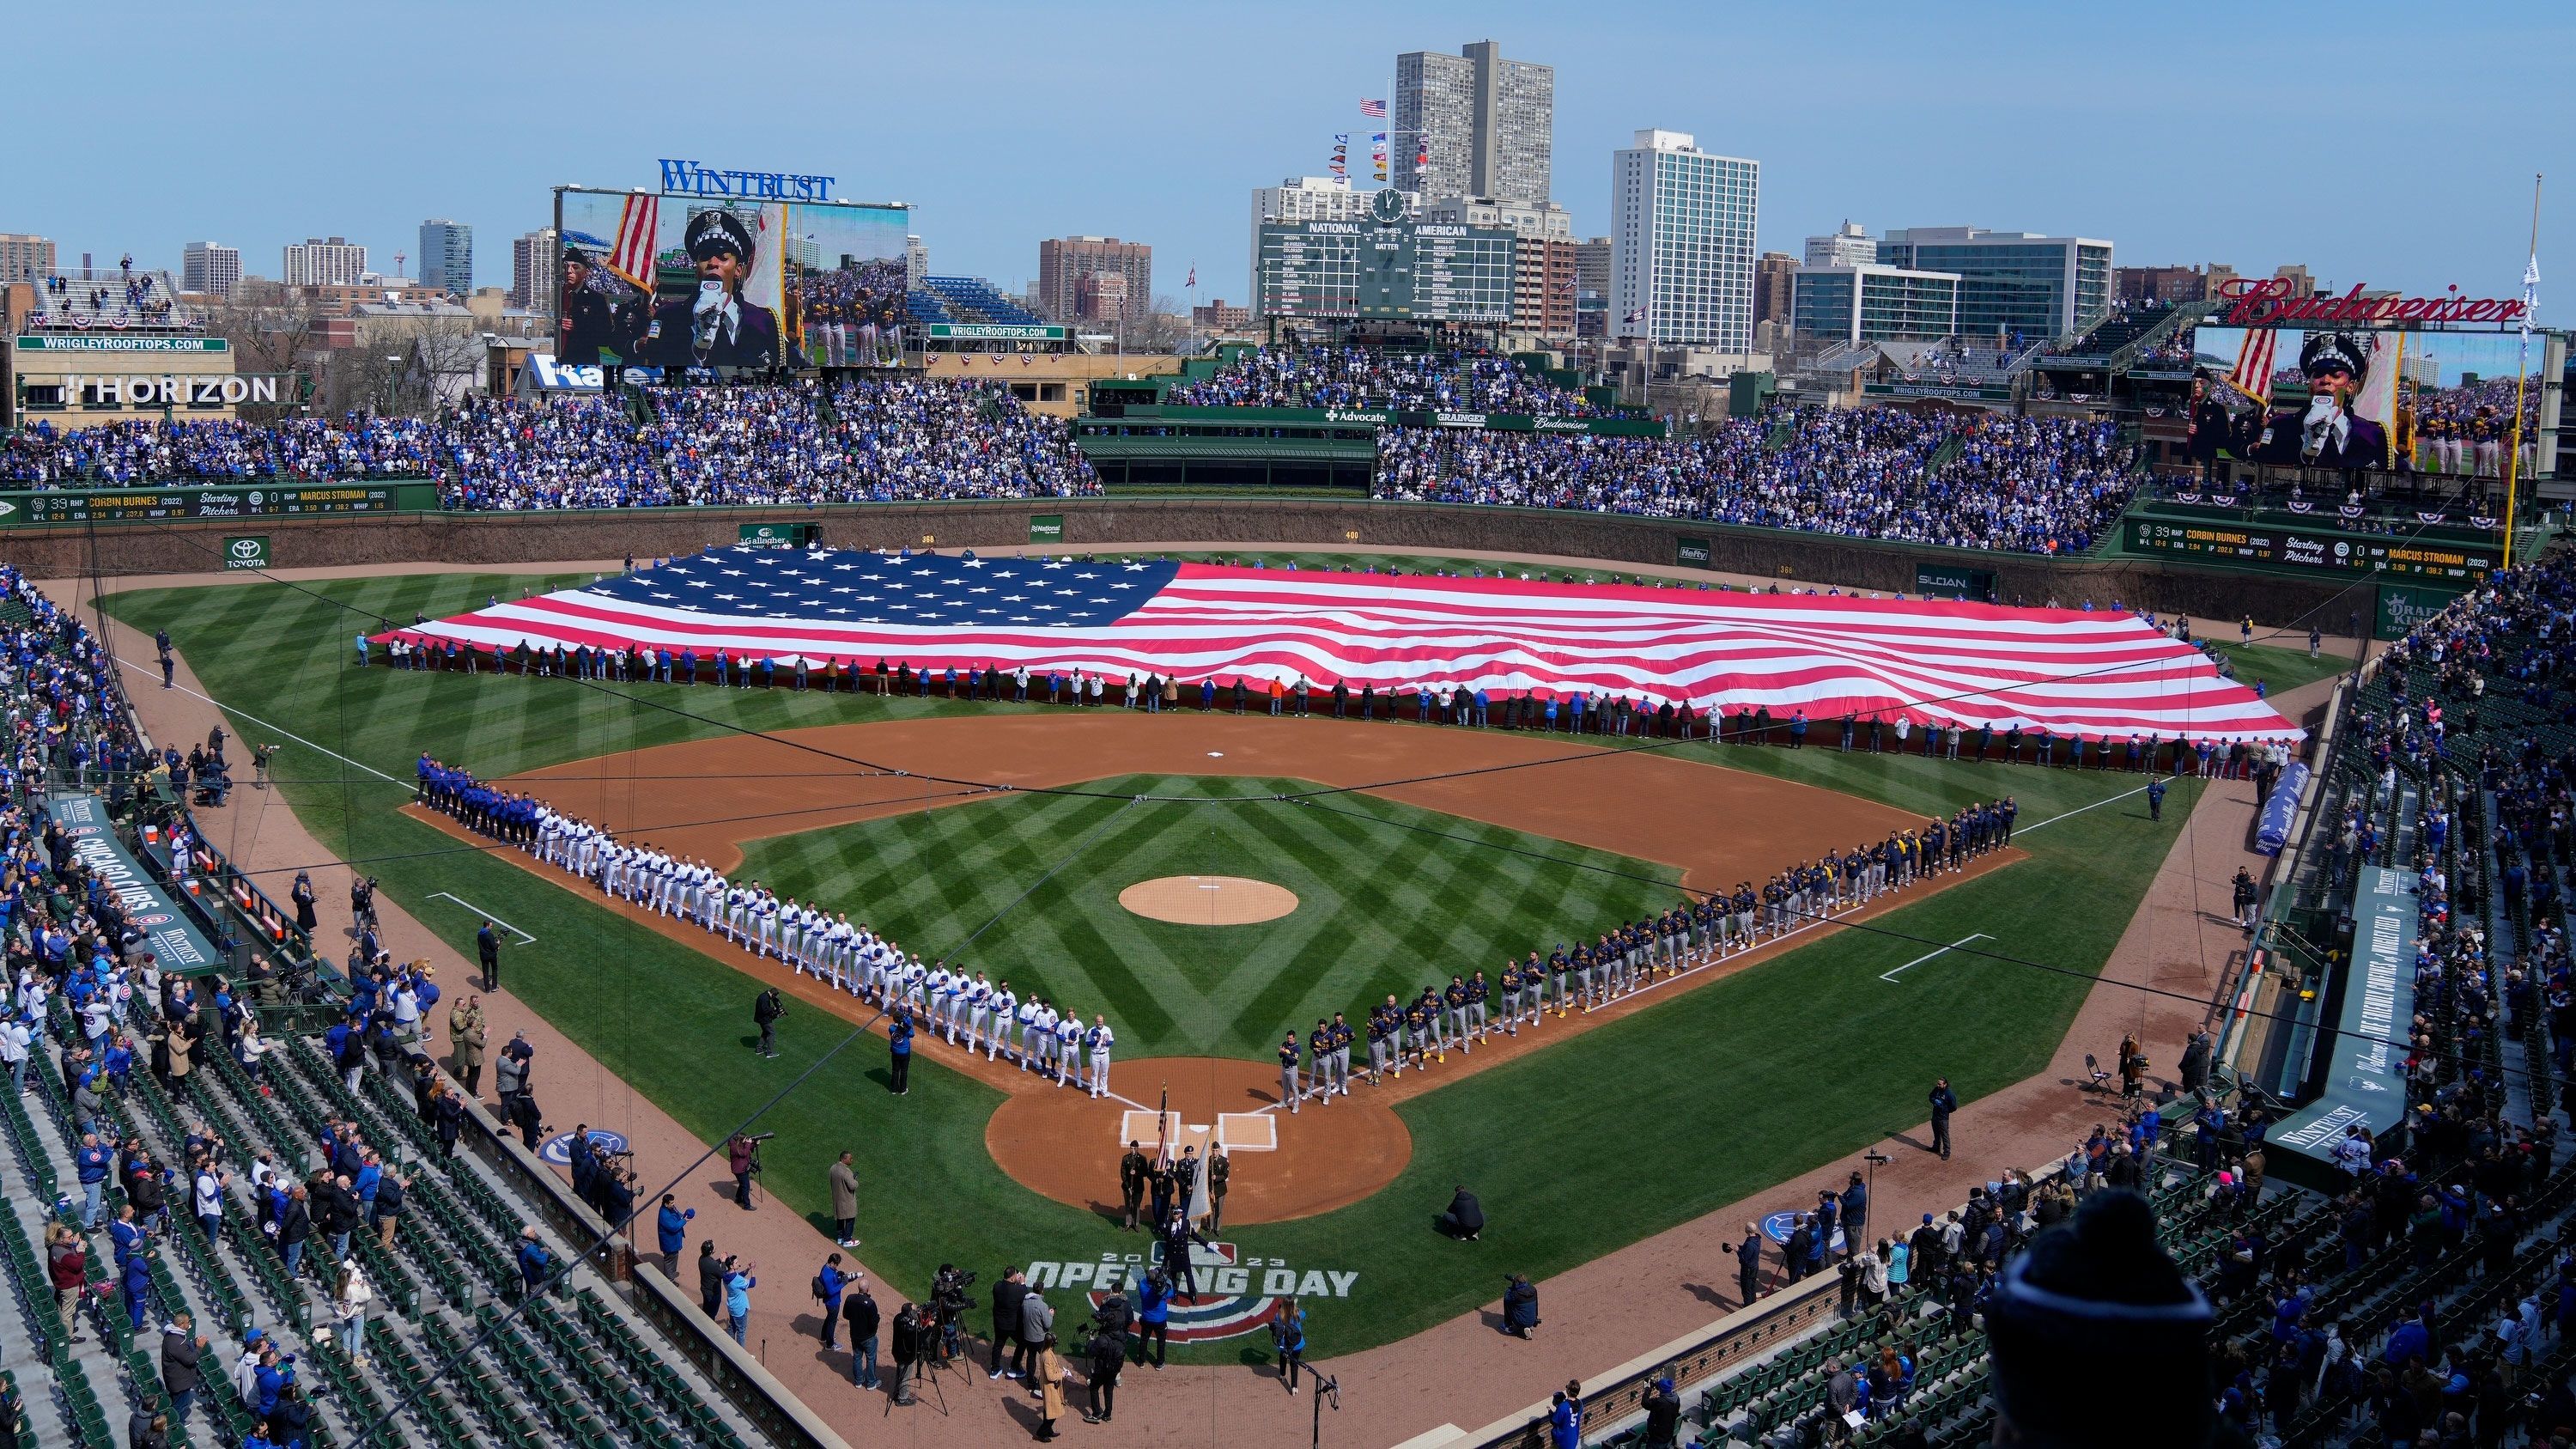 Chicago Cubs opening day at Wrigley Field 2022 